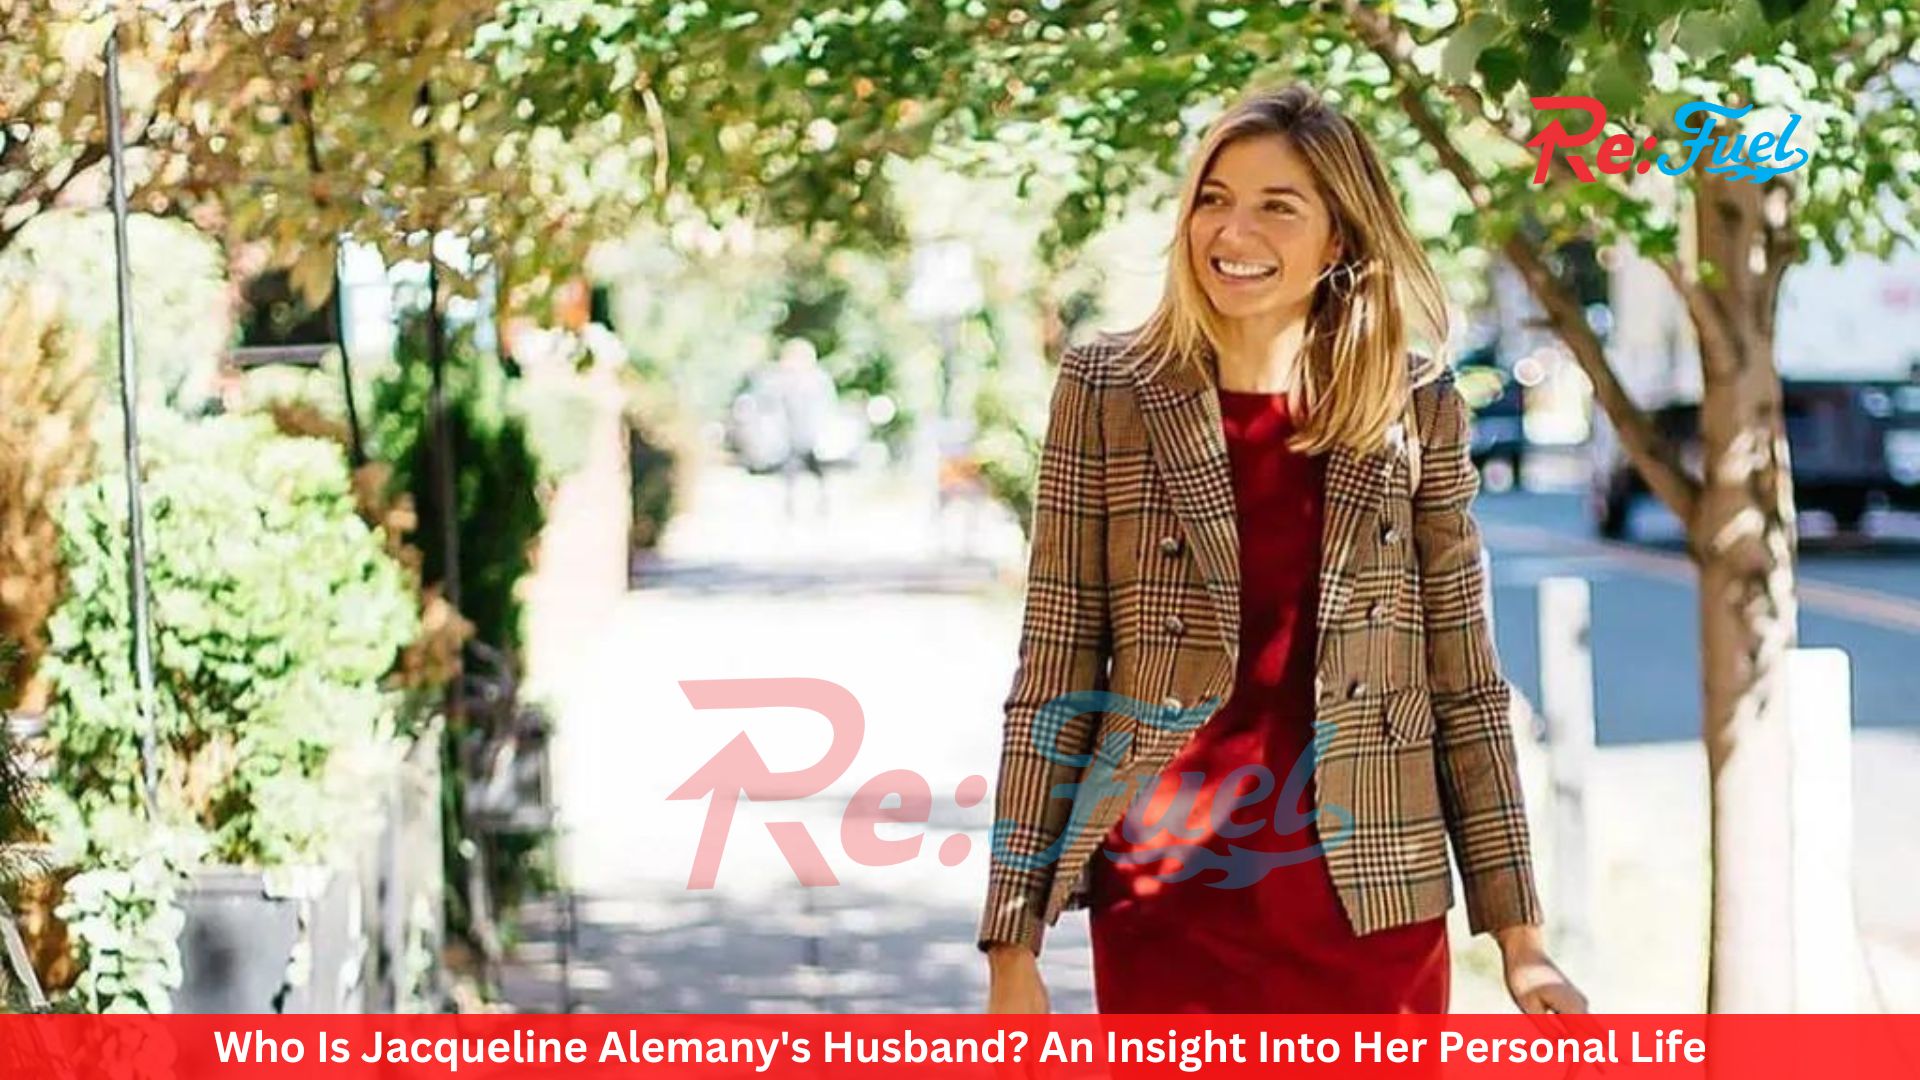 Who Is Jacqueline Alemany's Husband? An Insight Into Her Personal Life